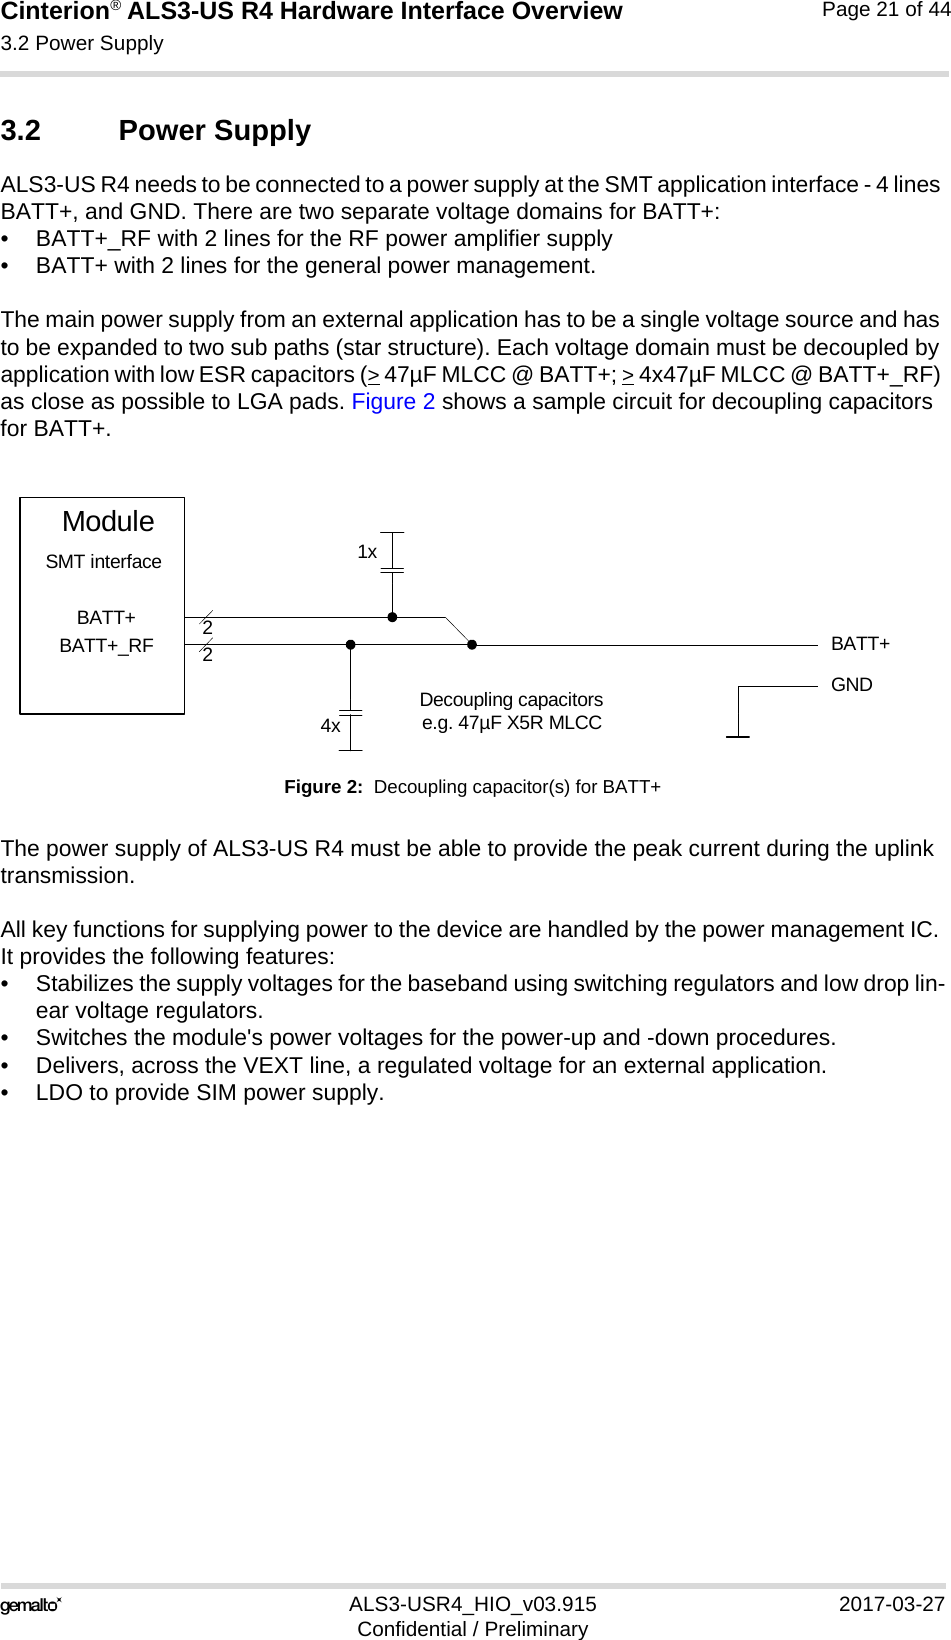 Cinterion® ALS3-US R4 Hardware Interface Overview3.2 Power Supply27ALS3-USR4_HIO_v03.915 2017-03-27Confidential / PreliminaryPage 21 of 443.2 Power SupplyALS3-US R4 needs to be connected to a power supply at the SMT application interface - 4 lines BATT+, and GND. There are two separate voltage domains for BATT+:• BATT+_RF with 2 lines for the RF power amplifier supply • BATT+ with 2 lines for the general power management. The main power supply from an external application has to be a single voltage source and has to be expanded to two sub paths (star structure). Each voltage domain must be decoupled by application with low ESR capacitors (&gt; 47µF MLCC @ BATT+; &gt; 4x47µF MLCC @ BATT+_RF) as close as possible to LGA pads. Figure 2 shows a sample circuit for decoupling capacitors for BATT+.Figure 2:  Decoupling capacitor(s) for BATT+The power supply of ALS3-US R4 must be able to provide the peak current during the uplink transmission. All key functions for supplying power to the device are handled by the power management IC. It provides the following features:• Stabilizes the supply voltages for the baseband using switching regulators and low drop lin-ear voltage regulators.• Switches the module&apos;s power voltages for the power-up and -down procedures.• Delivers, across the VEXT line, a regulated voltage for an external application.• LDO to provide SIM power supply.BATT+22Decoupling capacitorse.g. 47µF X5R MLCC4xGNDBATT+BATT+_RFModuleSMT interface 1x